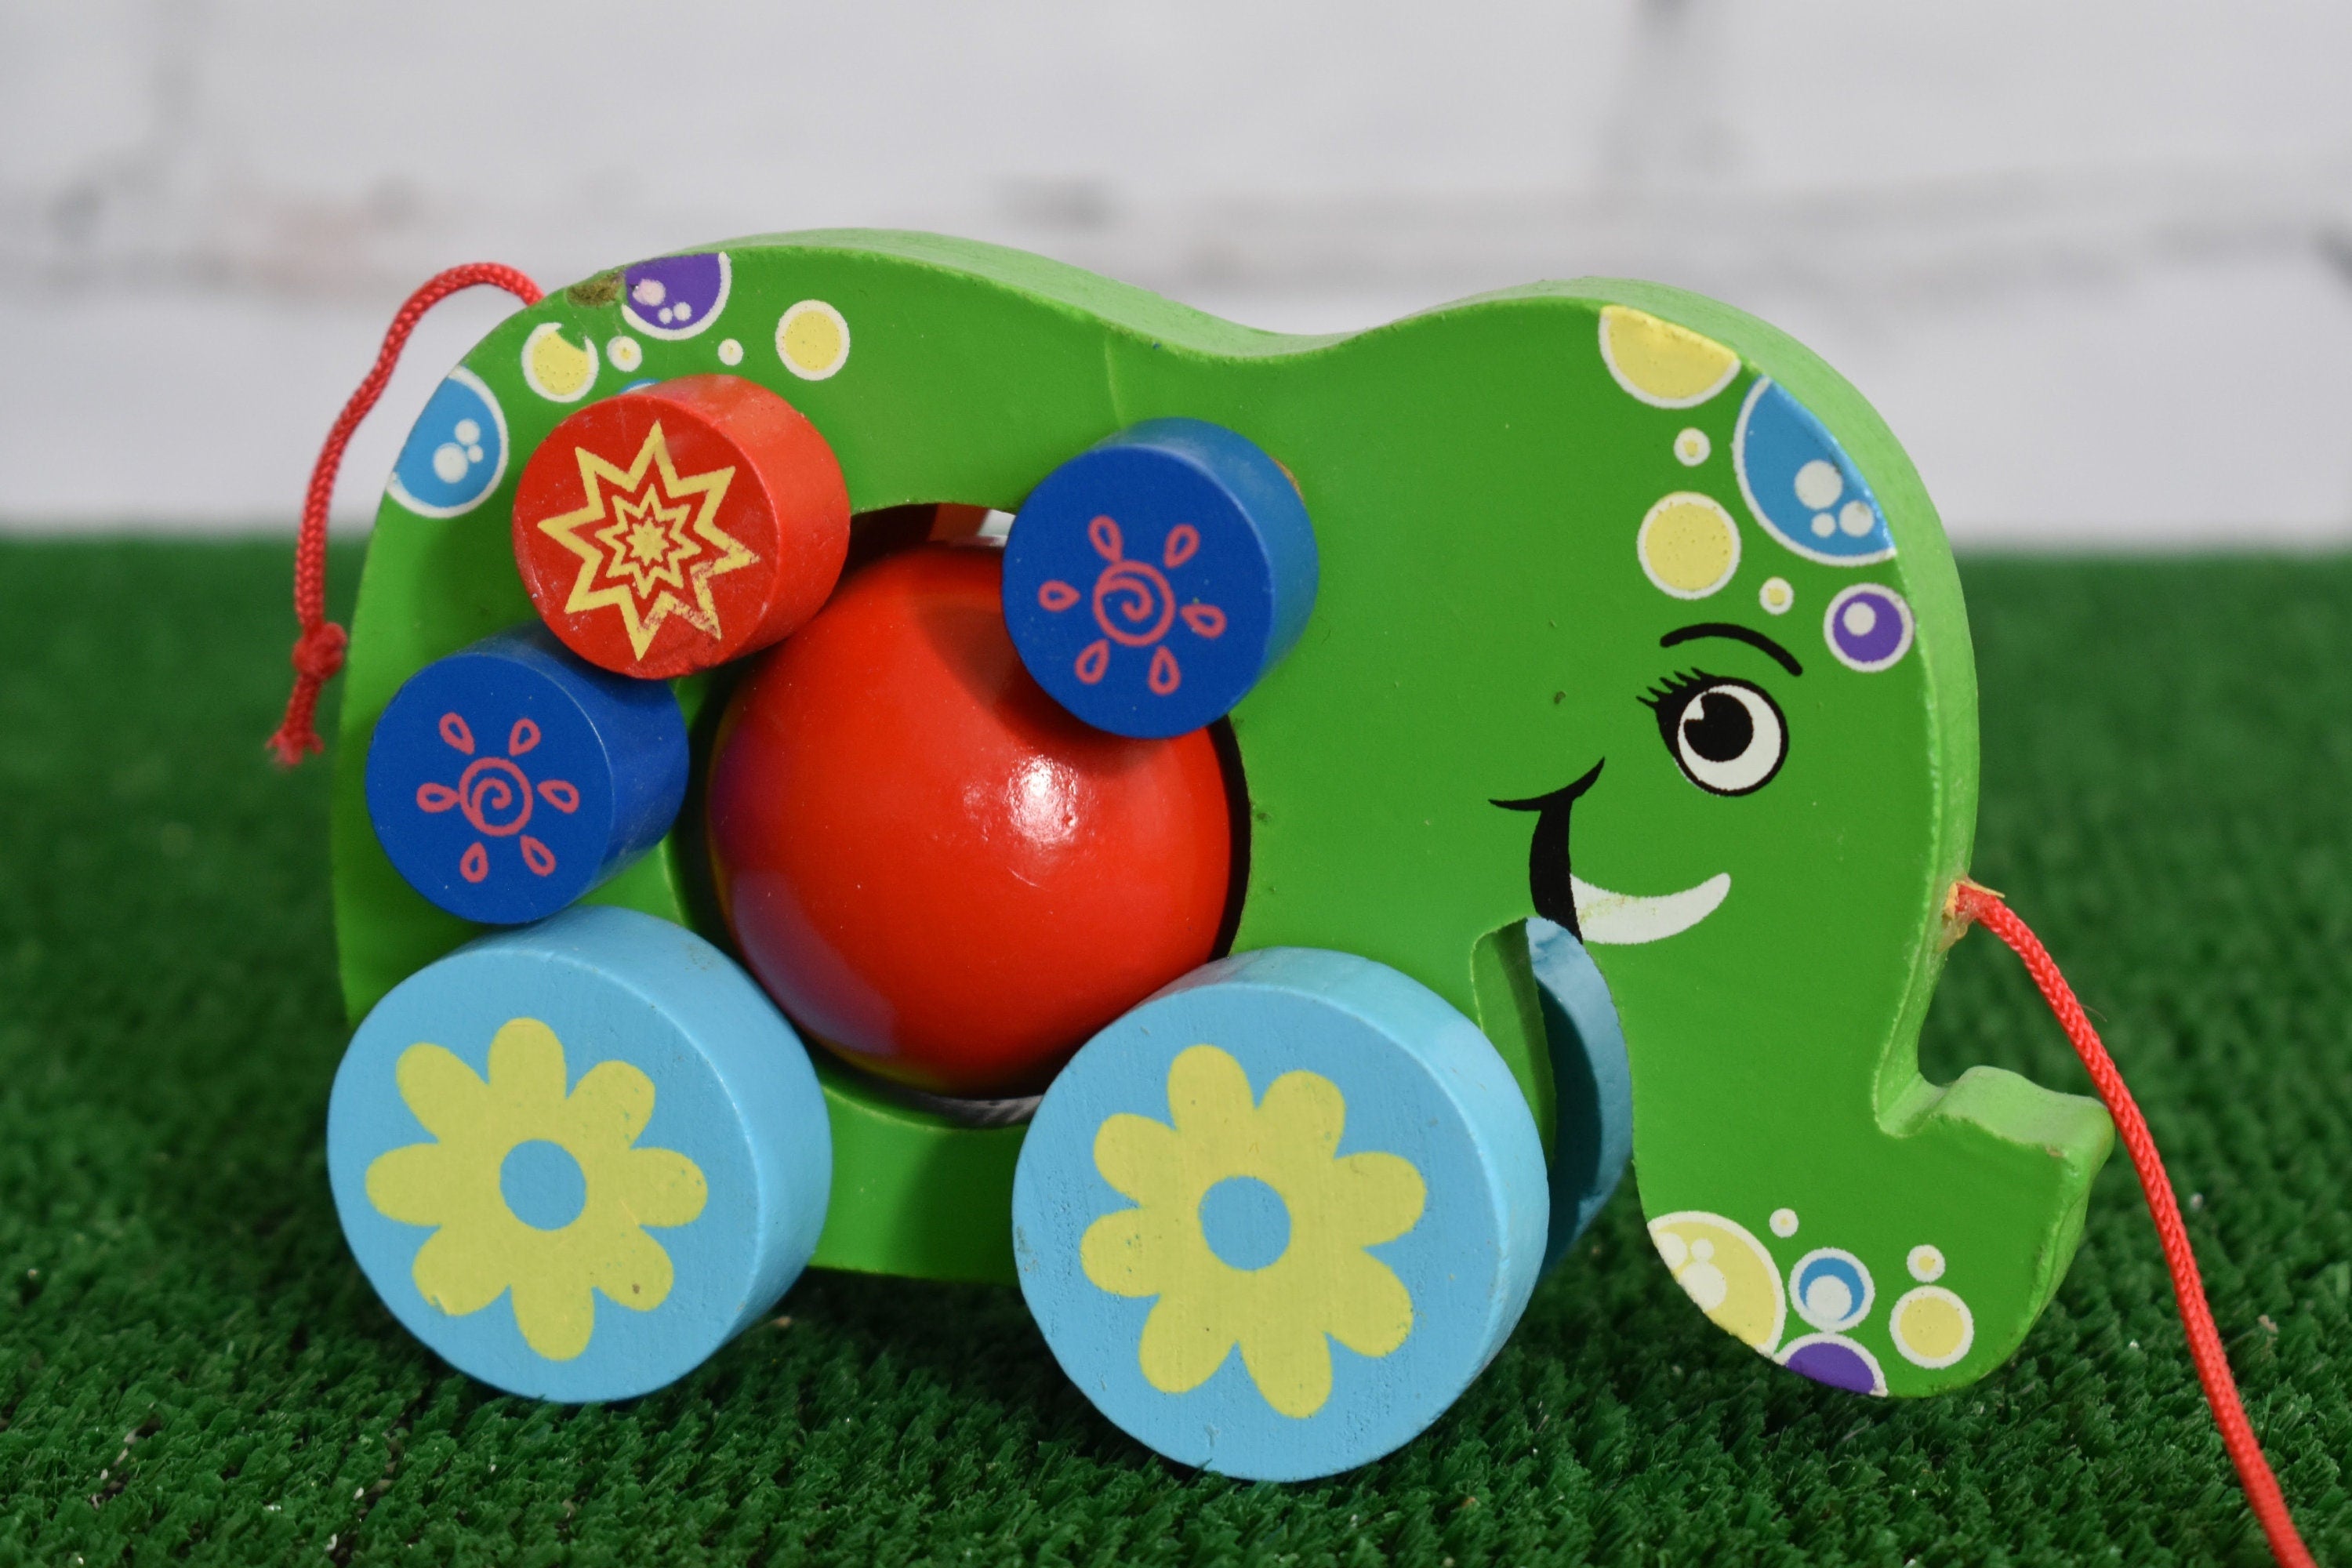 Child-Safe Artistic Handmade Elephant on wheels Ball and string Toddler Wooden Pull Toy / Toddler Gift / Return Gifts